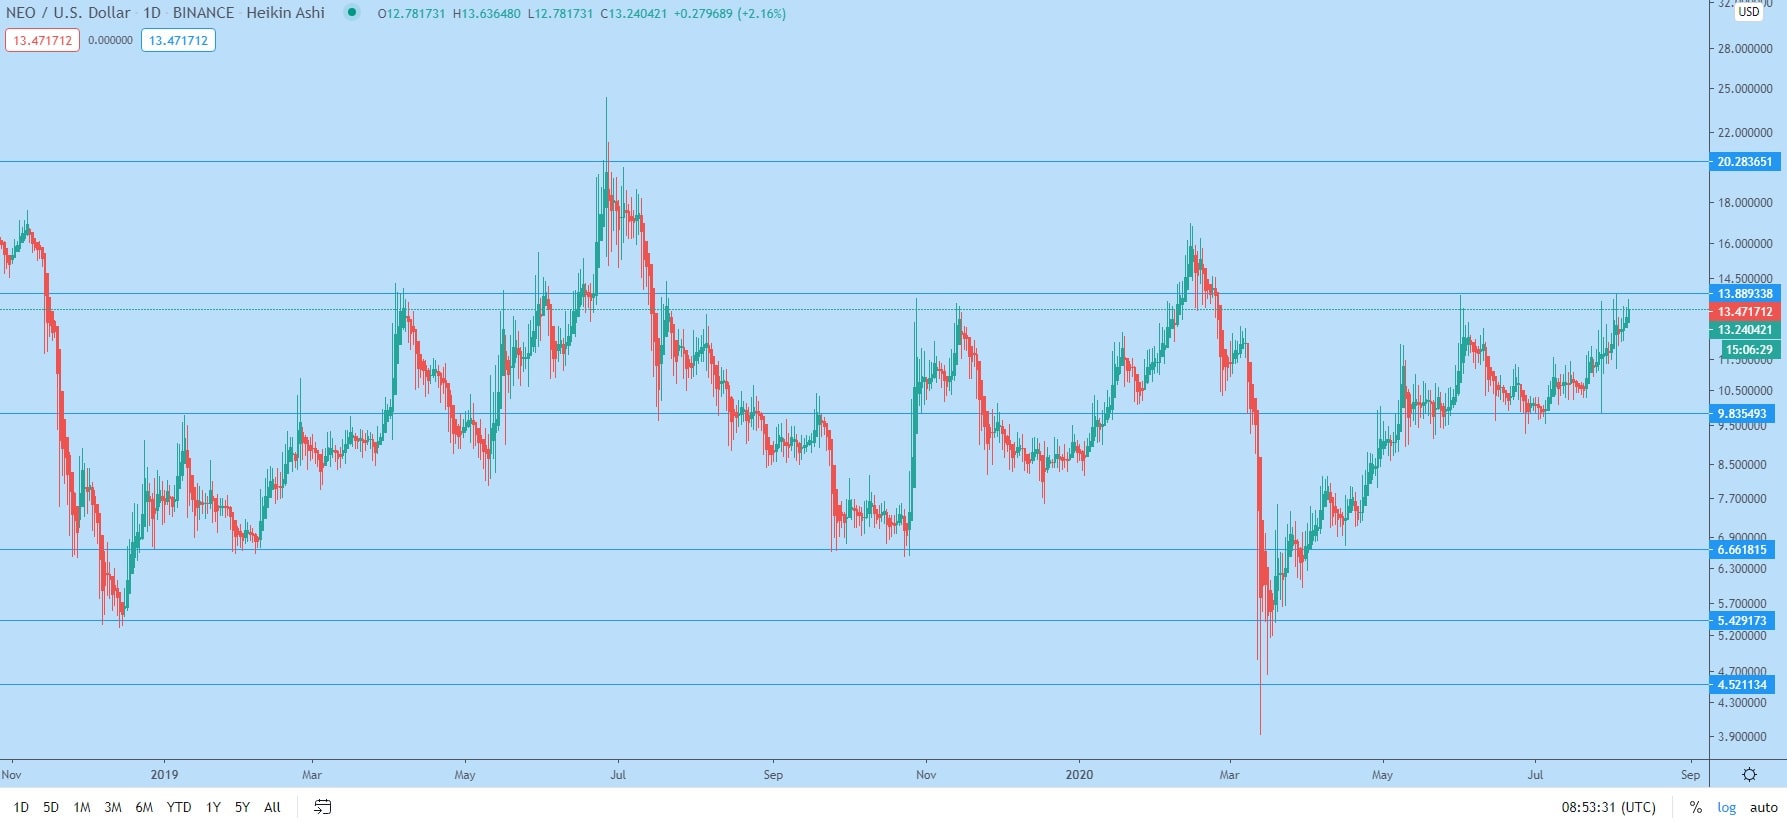 NEO/USD daily logarithmic chart for 2019-2020